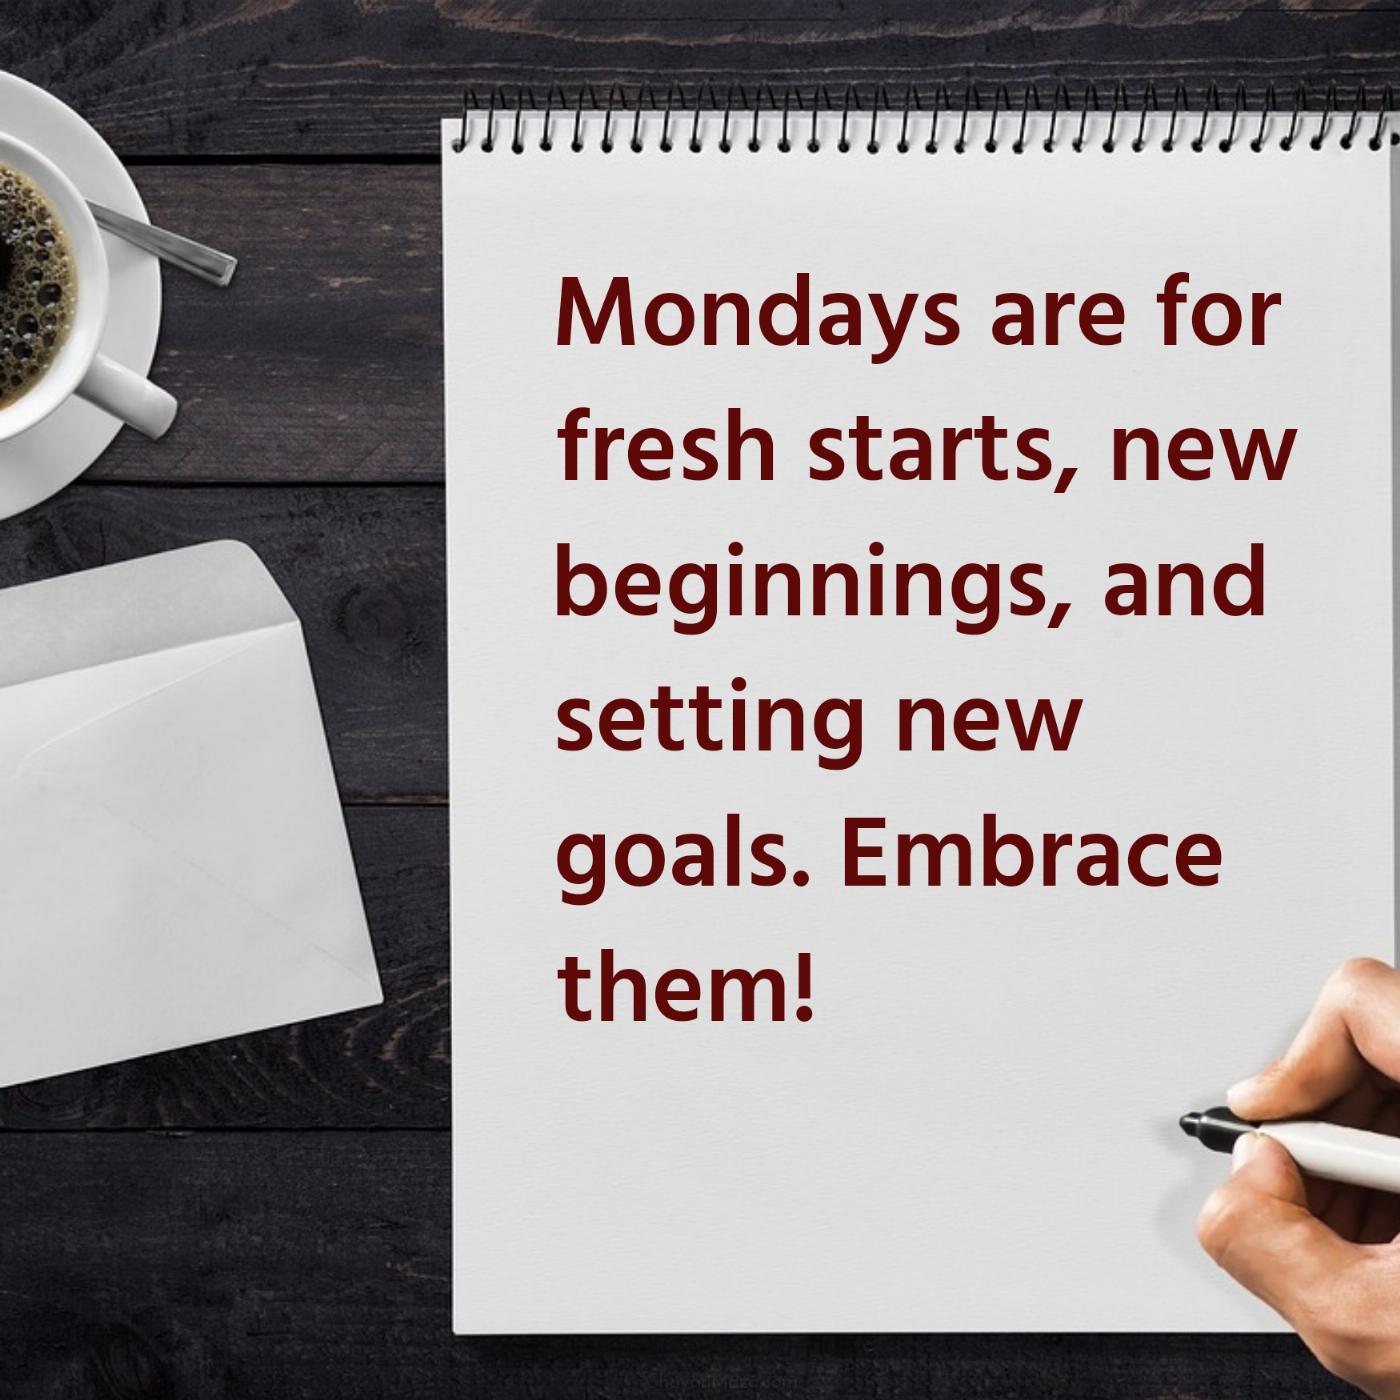 Mondays are for fresh starts new beginnings